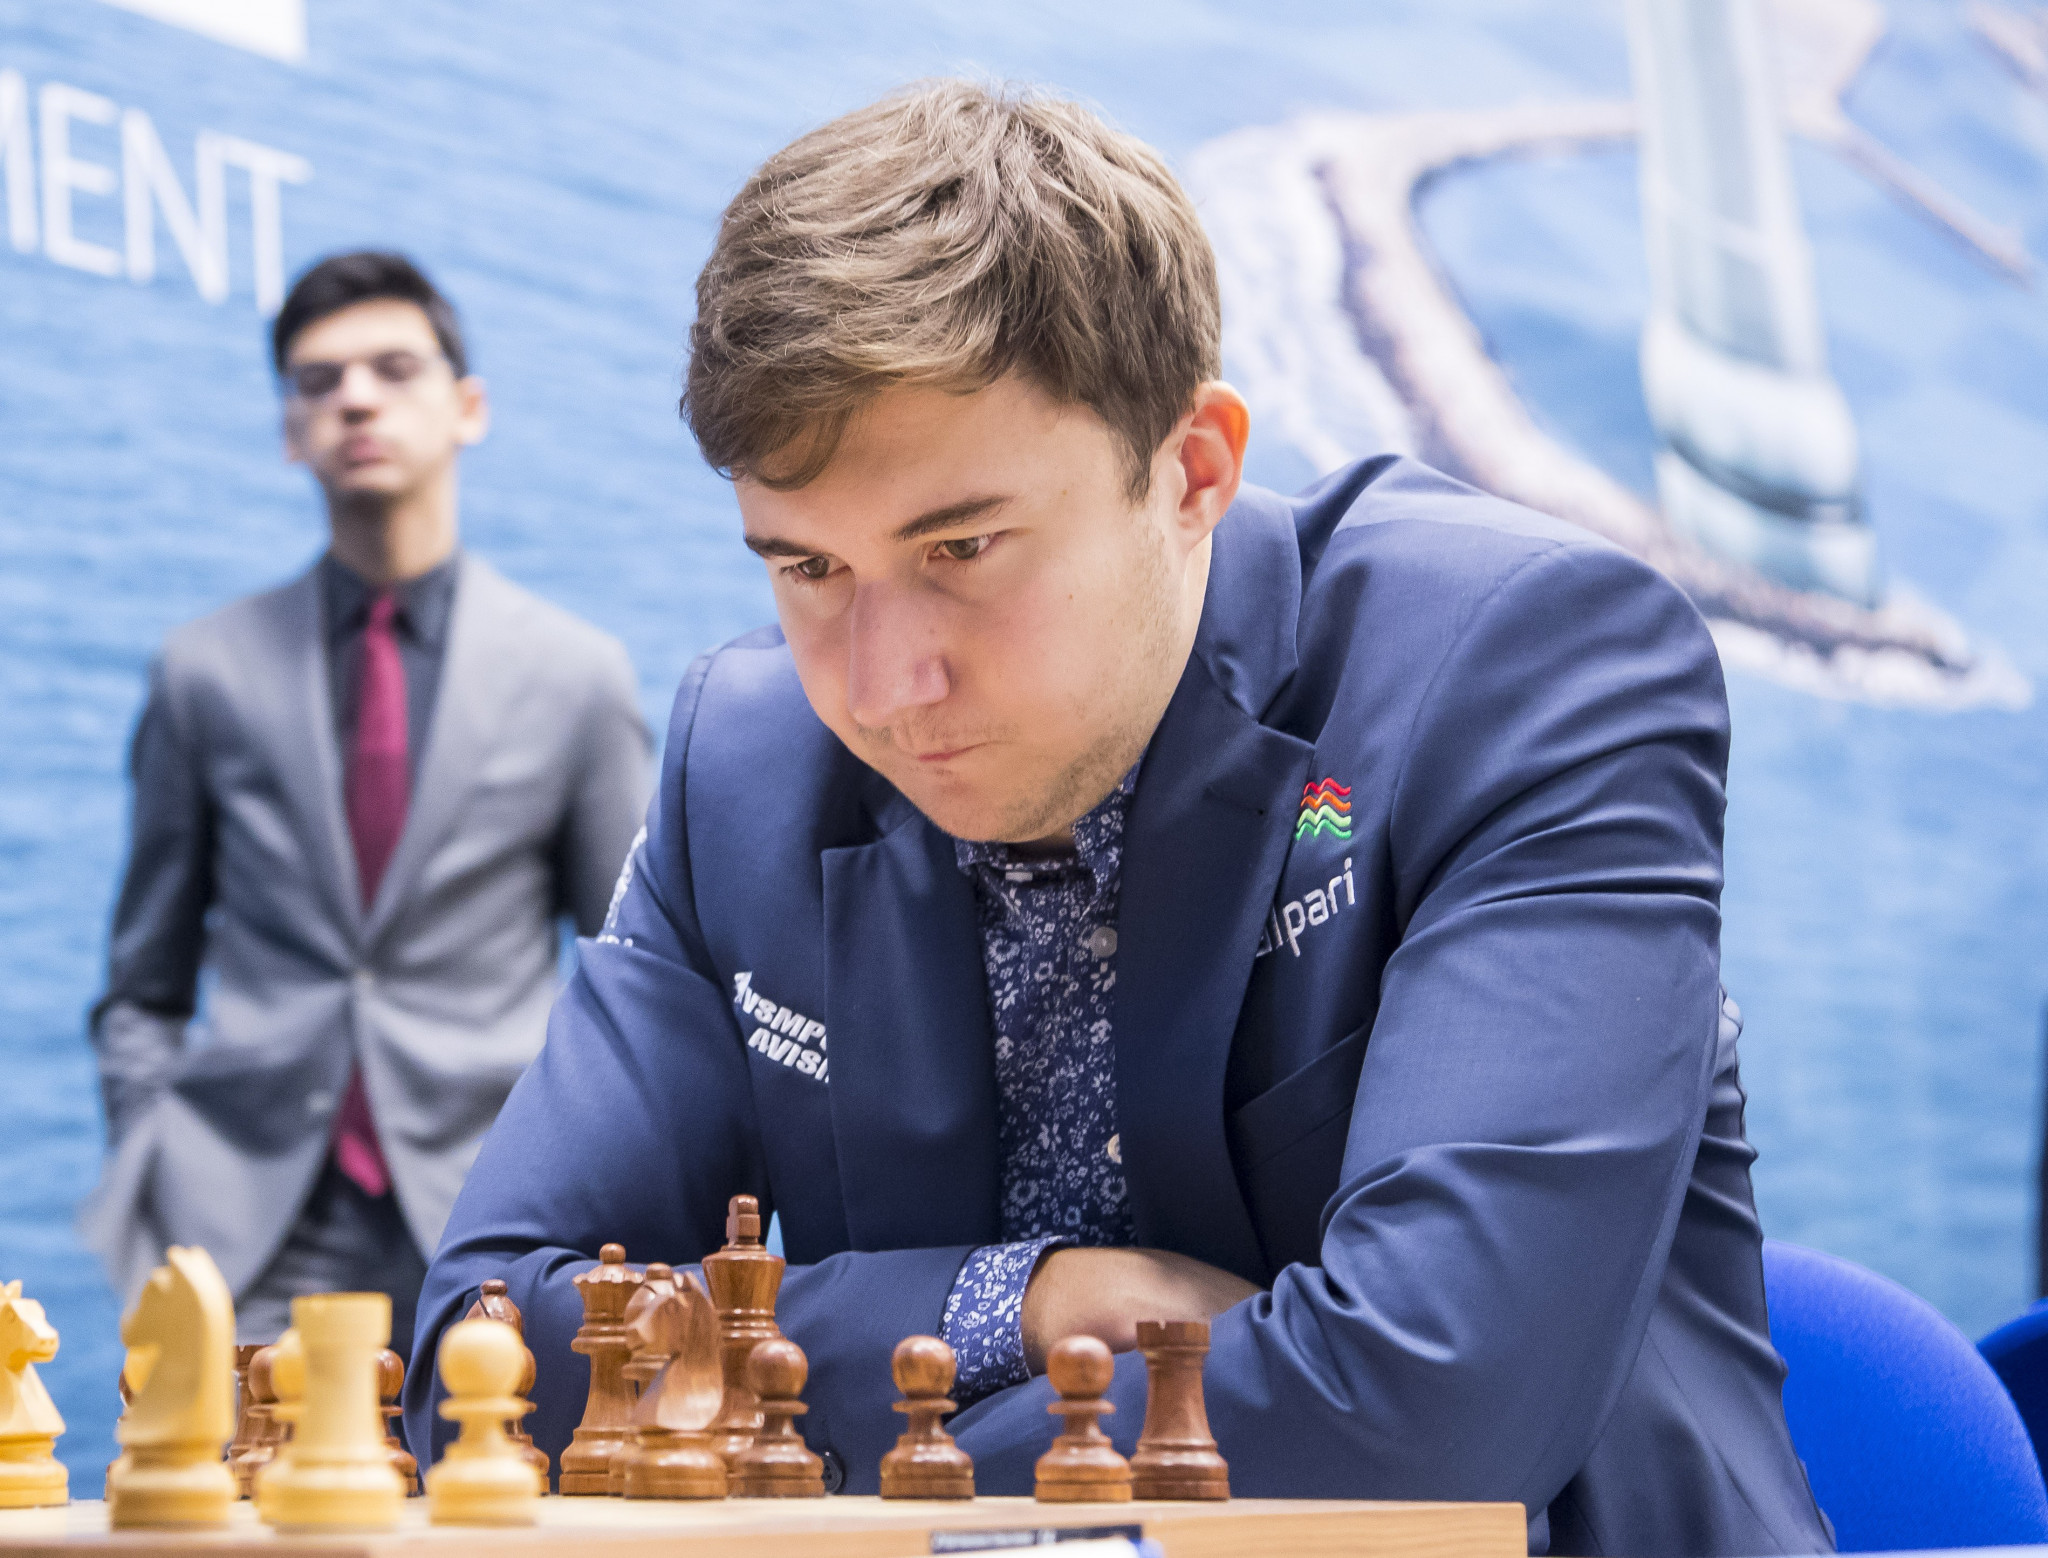 Sergey Karjakin came up short in the Chess Federation of Russia Presidential election ©Getty Images